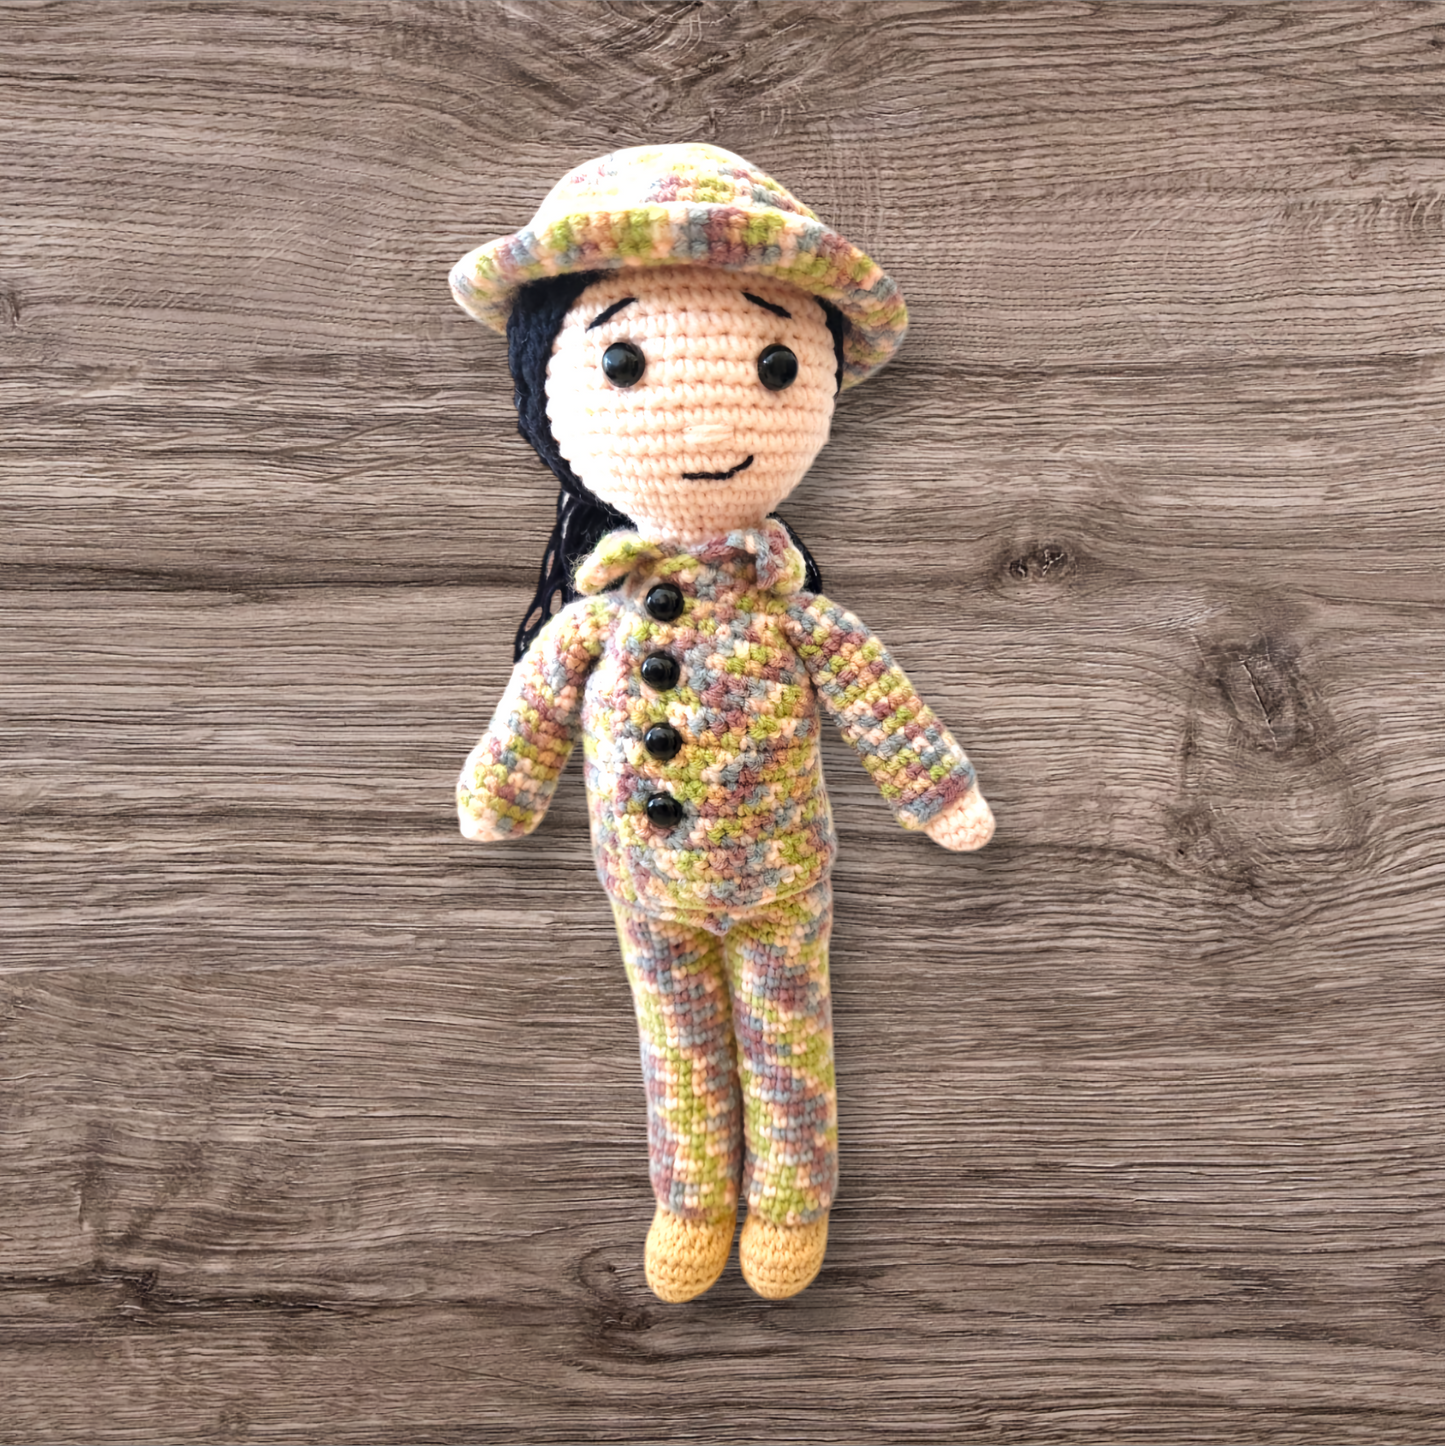 Personalised Companions for Military Kids. Handcrafted with Care!